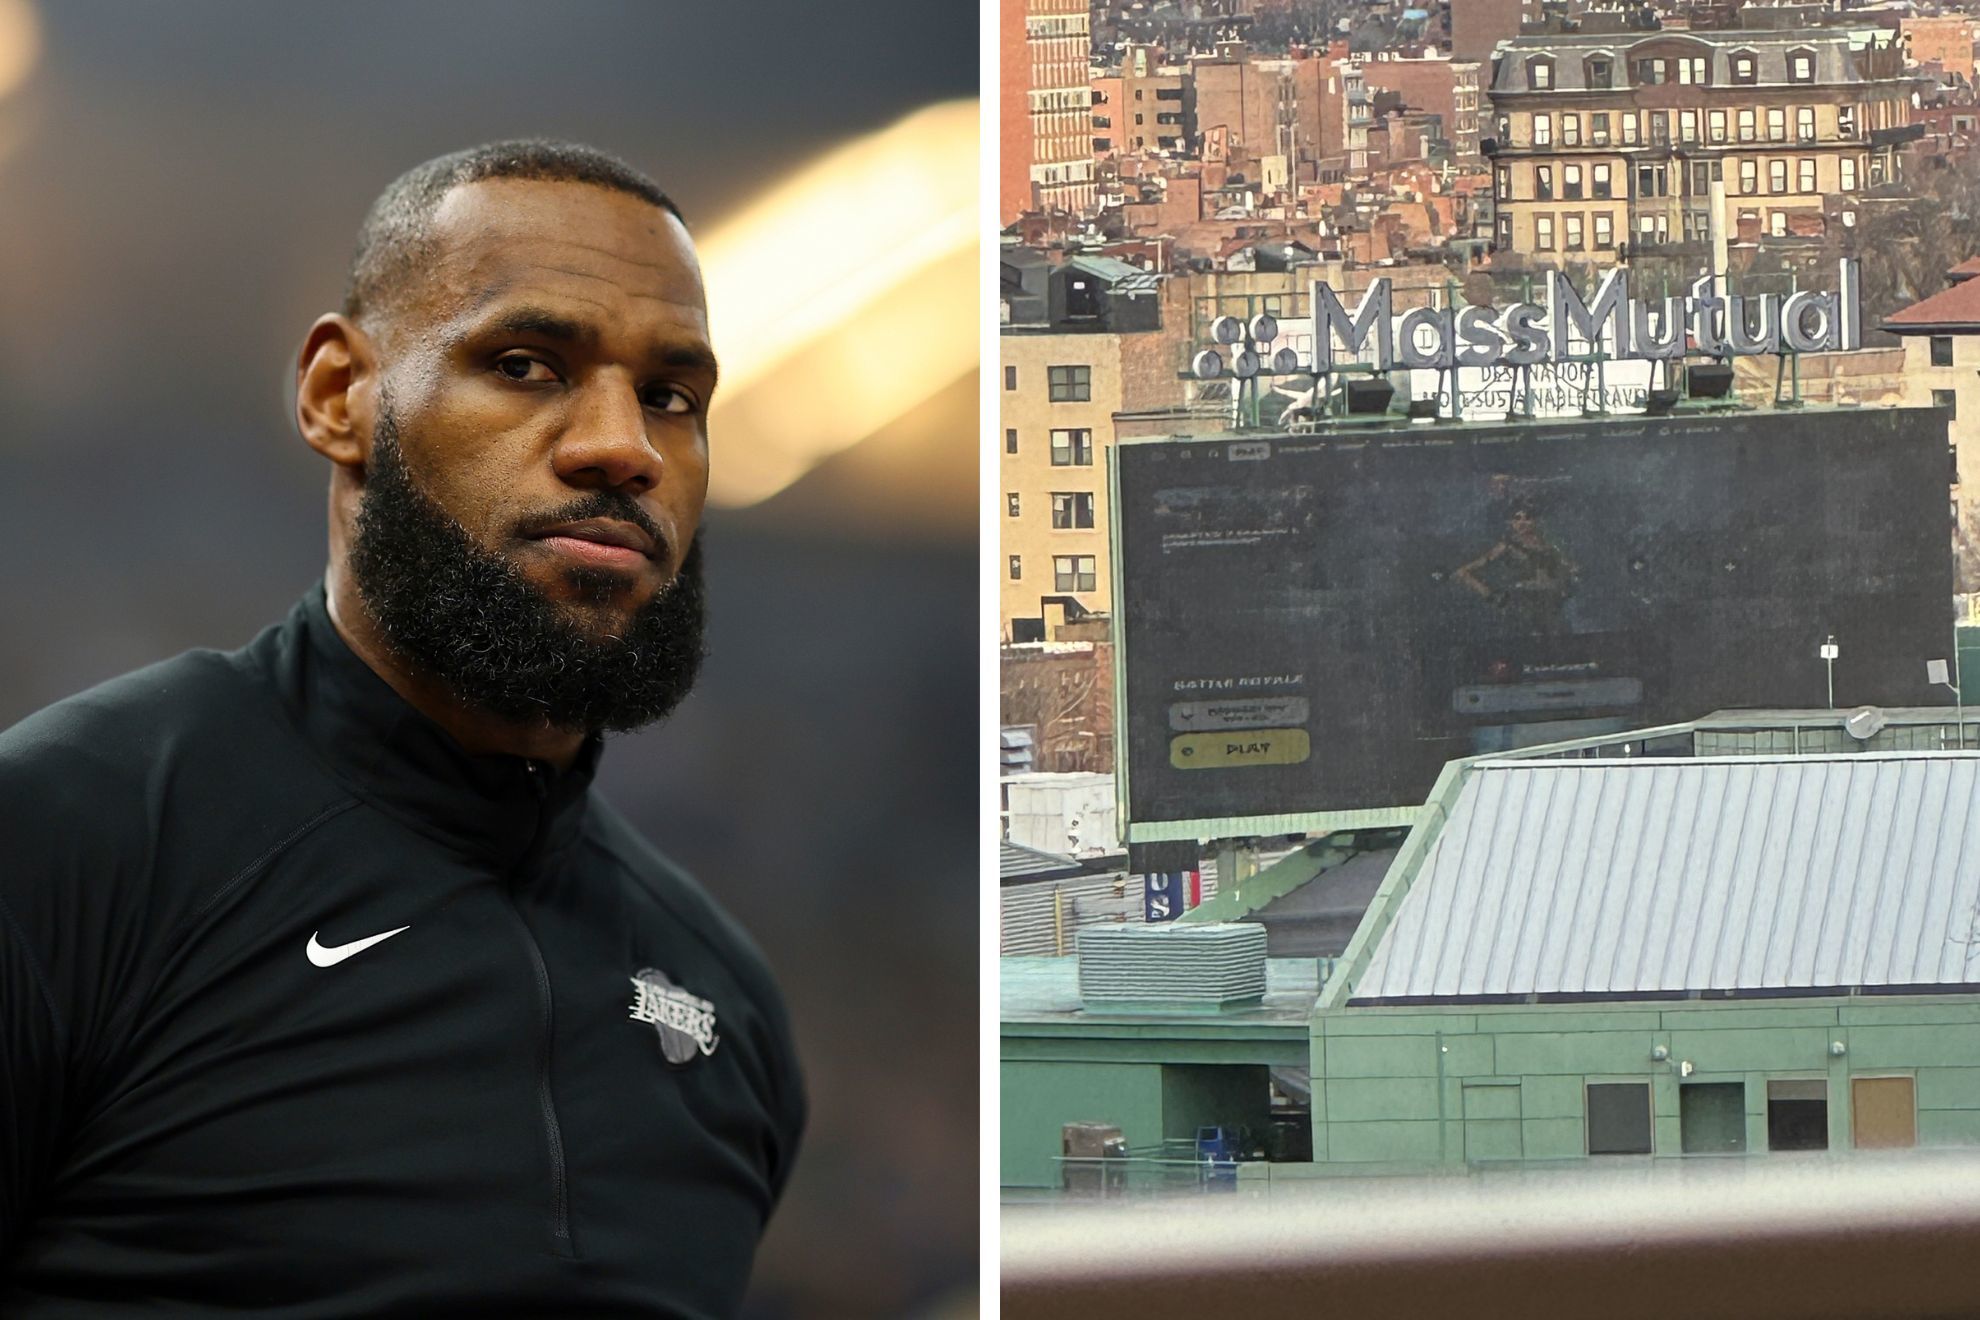 LeBron James calls next on Fenway Parks jumbotron after someone used it to play Fortnite